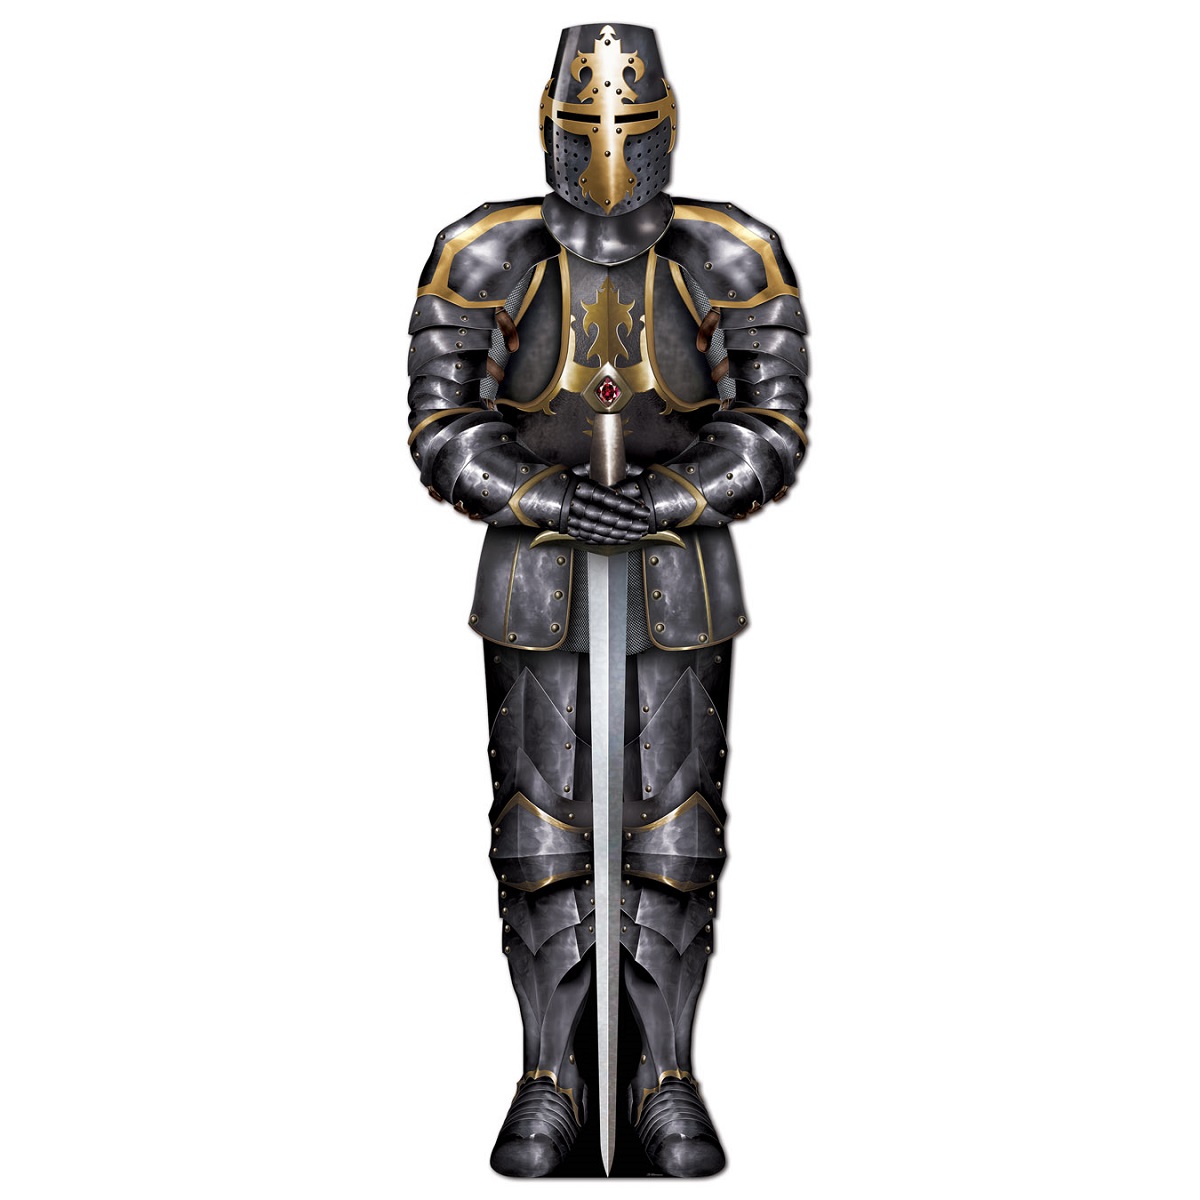 Party Central Club Pack of 12 Gray and Gold Medieval Themed Jointed Black Knight Party Decors 6' - image 1 of 1